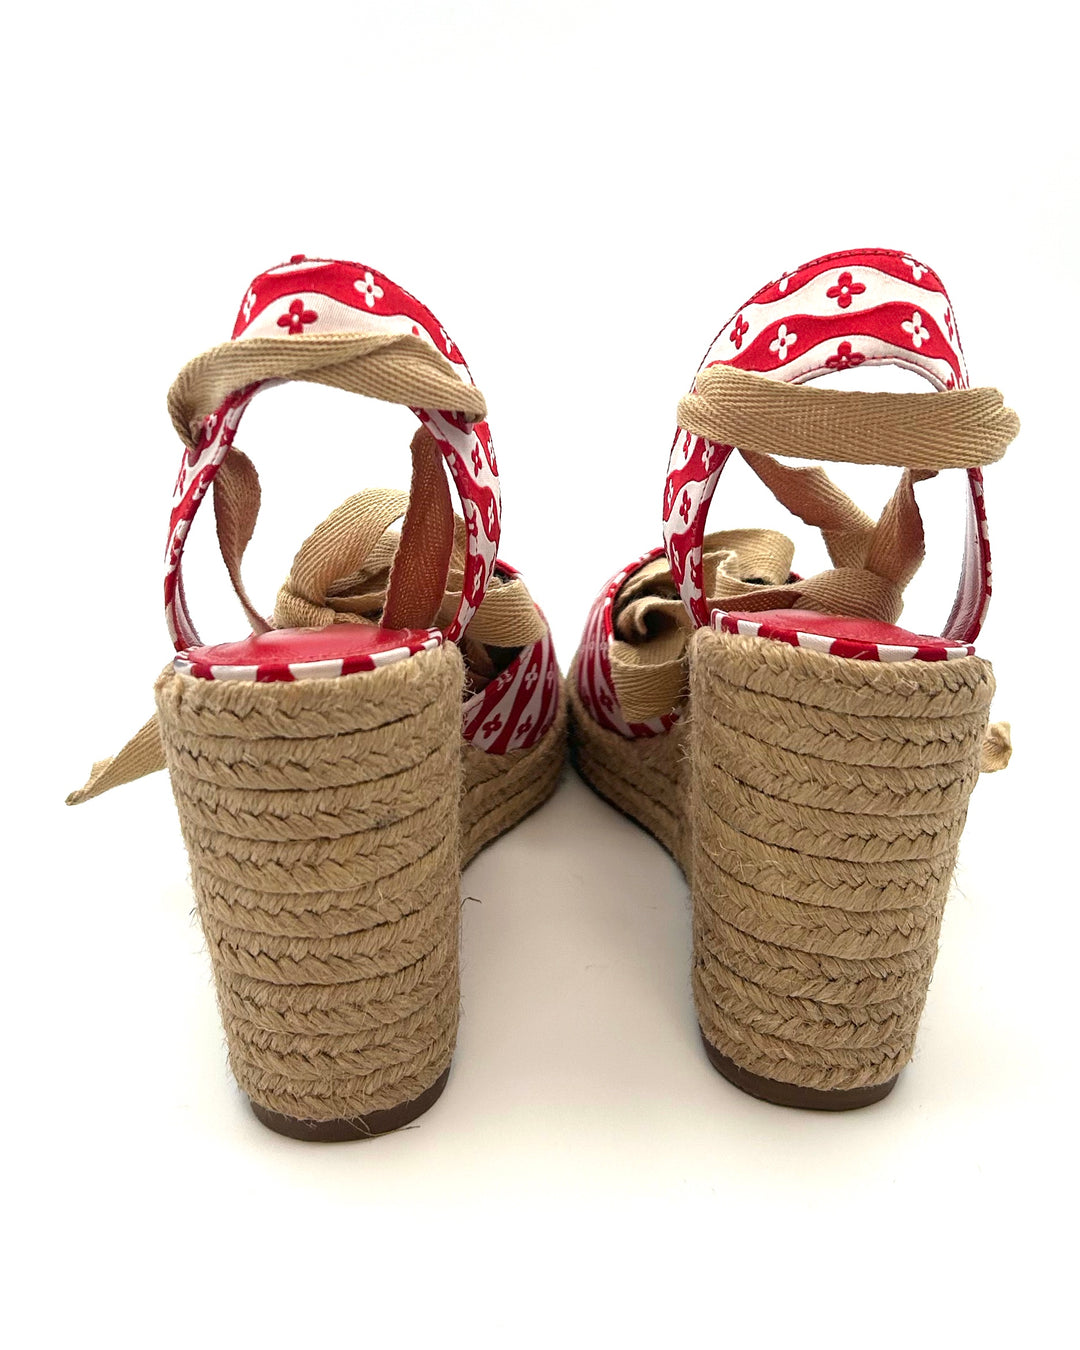 Red and White Floral Wedge Sandal - Size 6.5